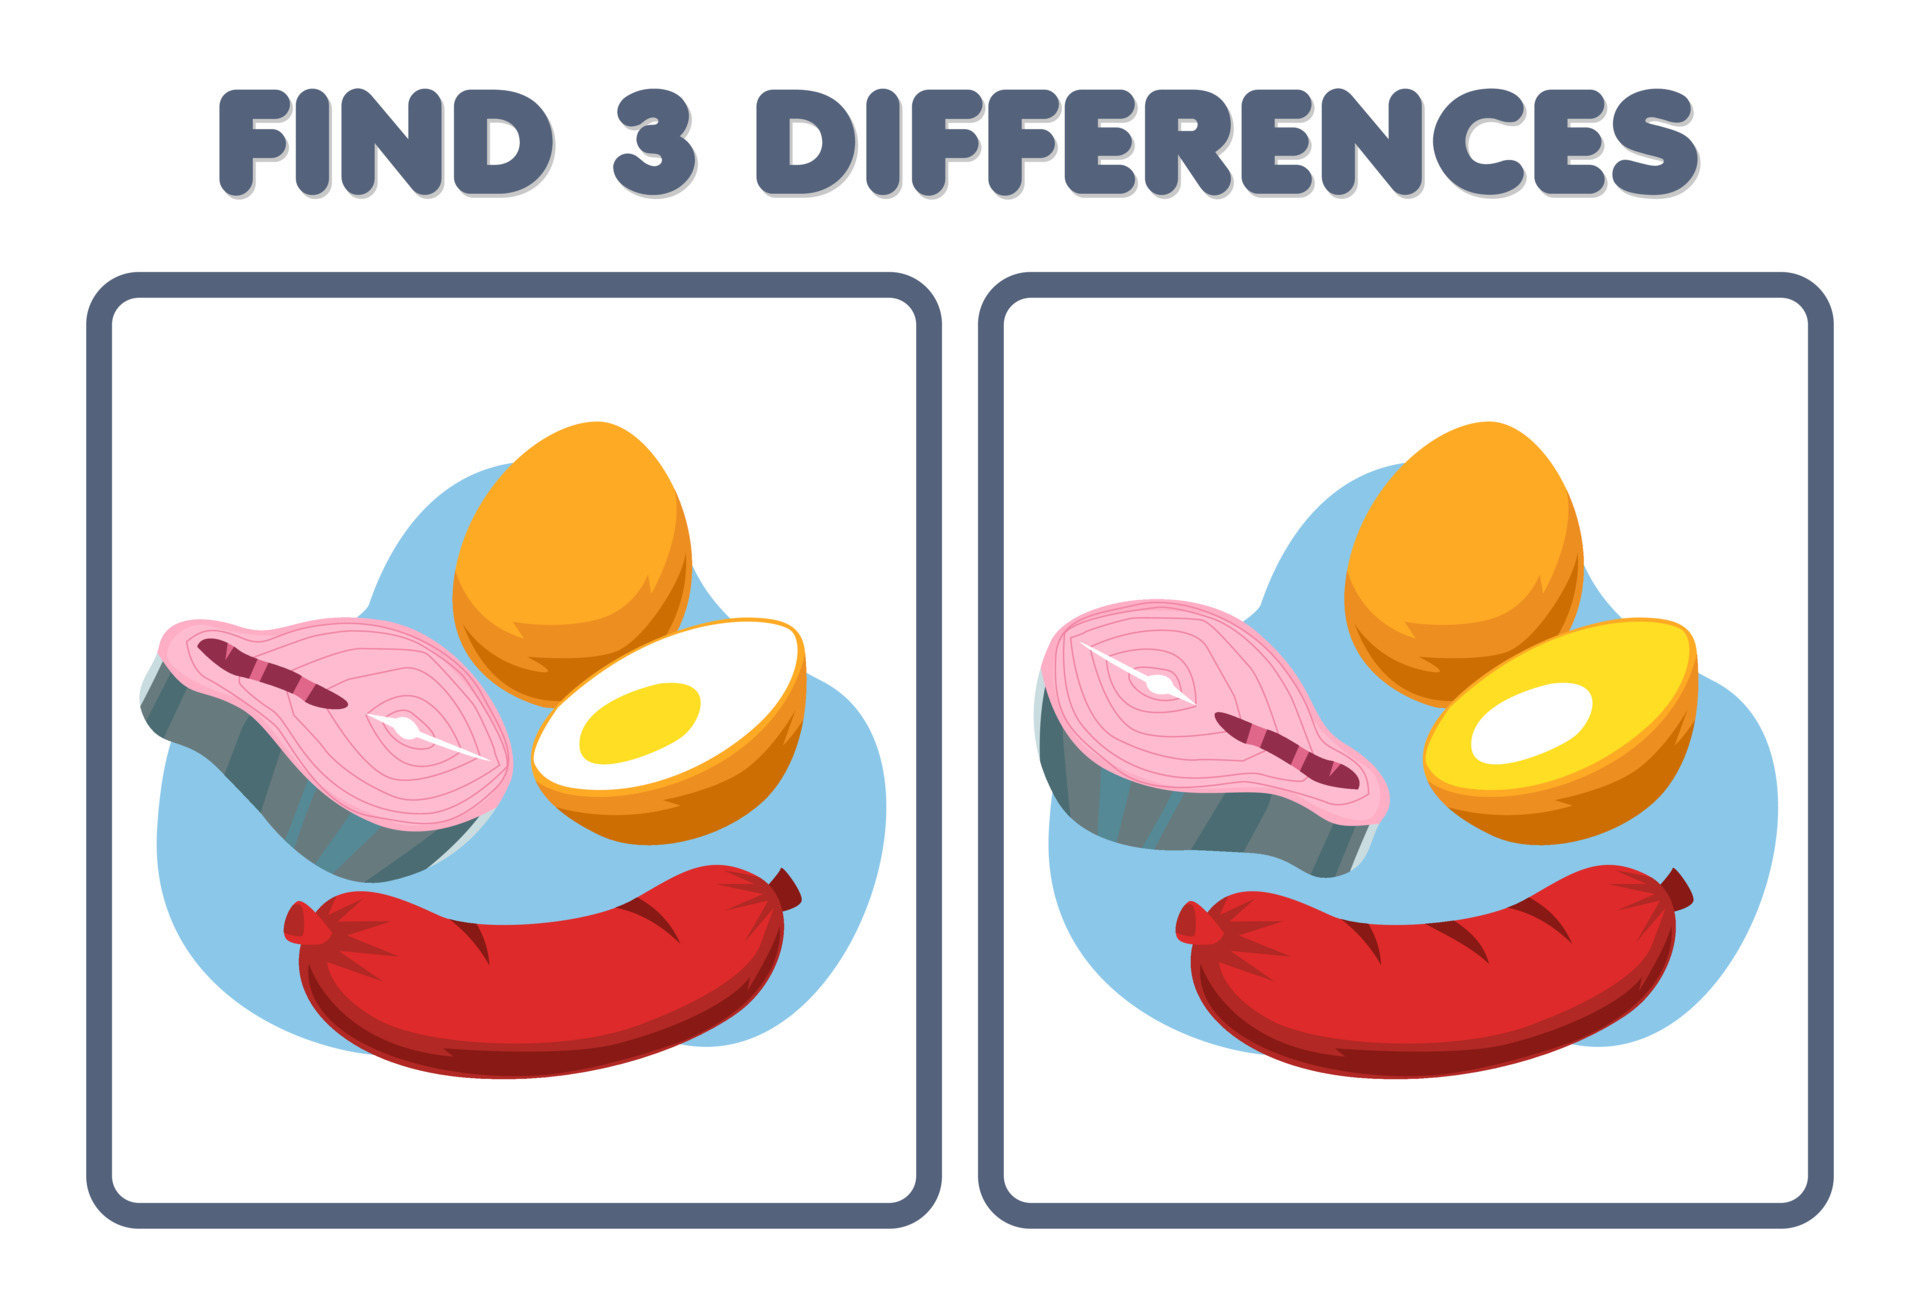 Education game for children find three differences between two